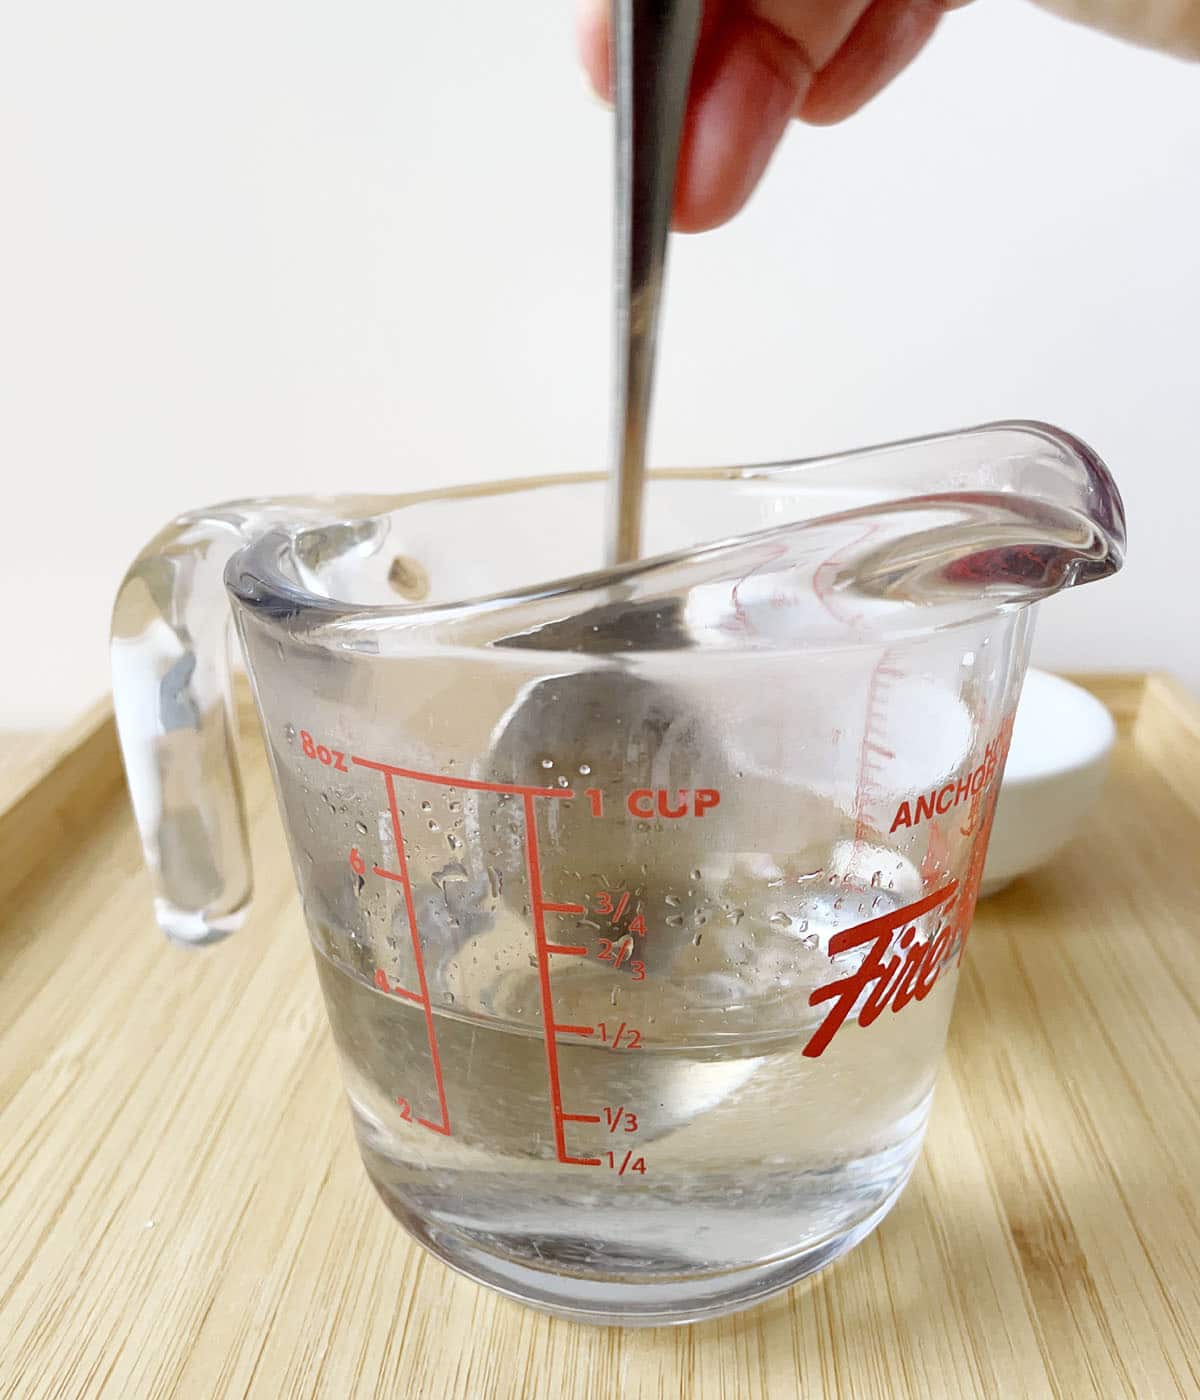 A hand holding a spoon stirring clear liquid in a glass measuring cup.